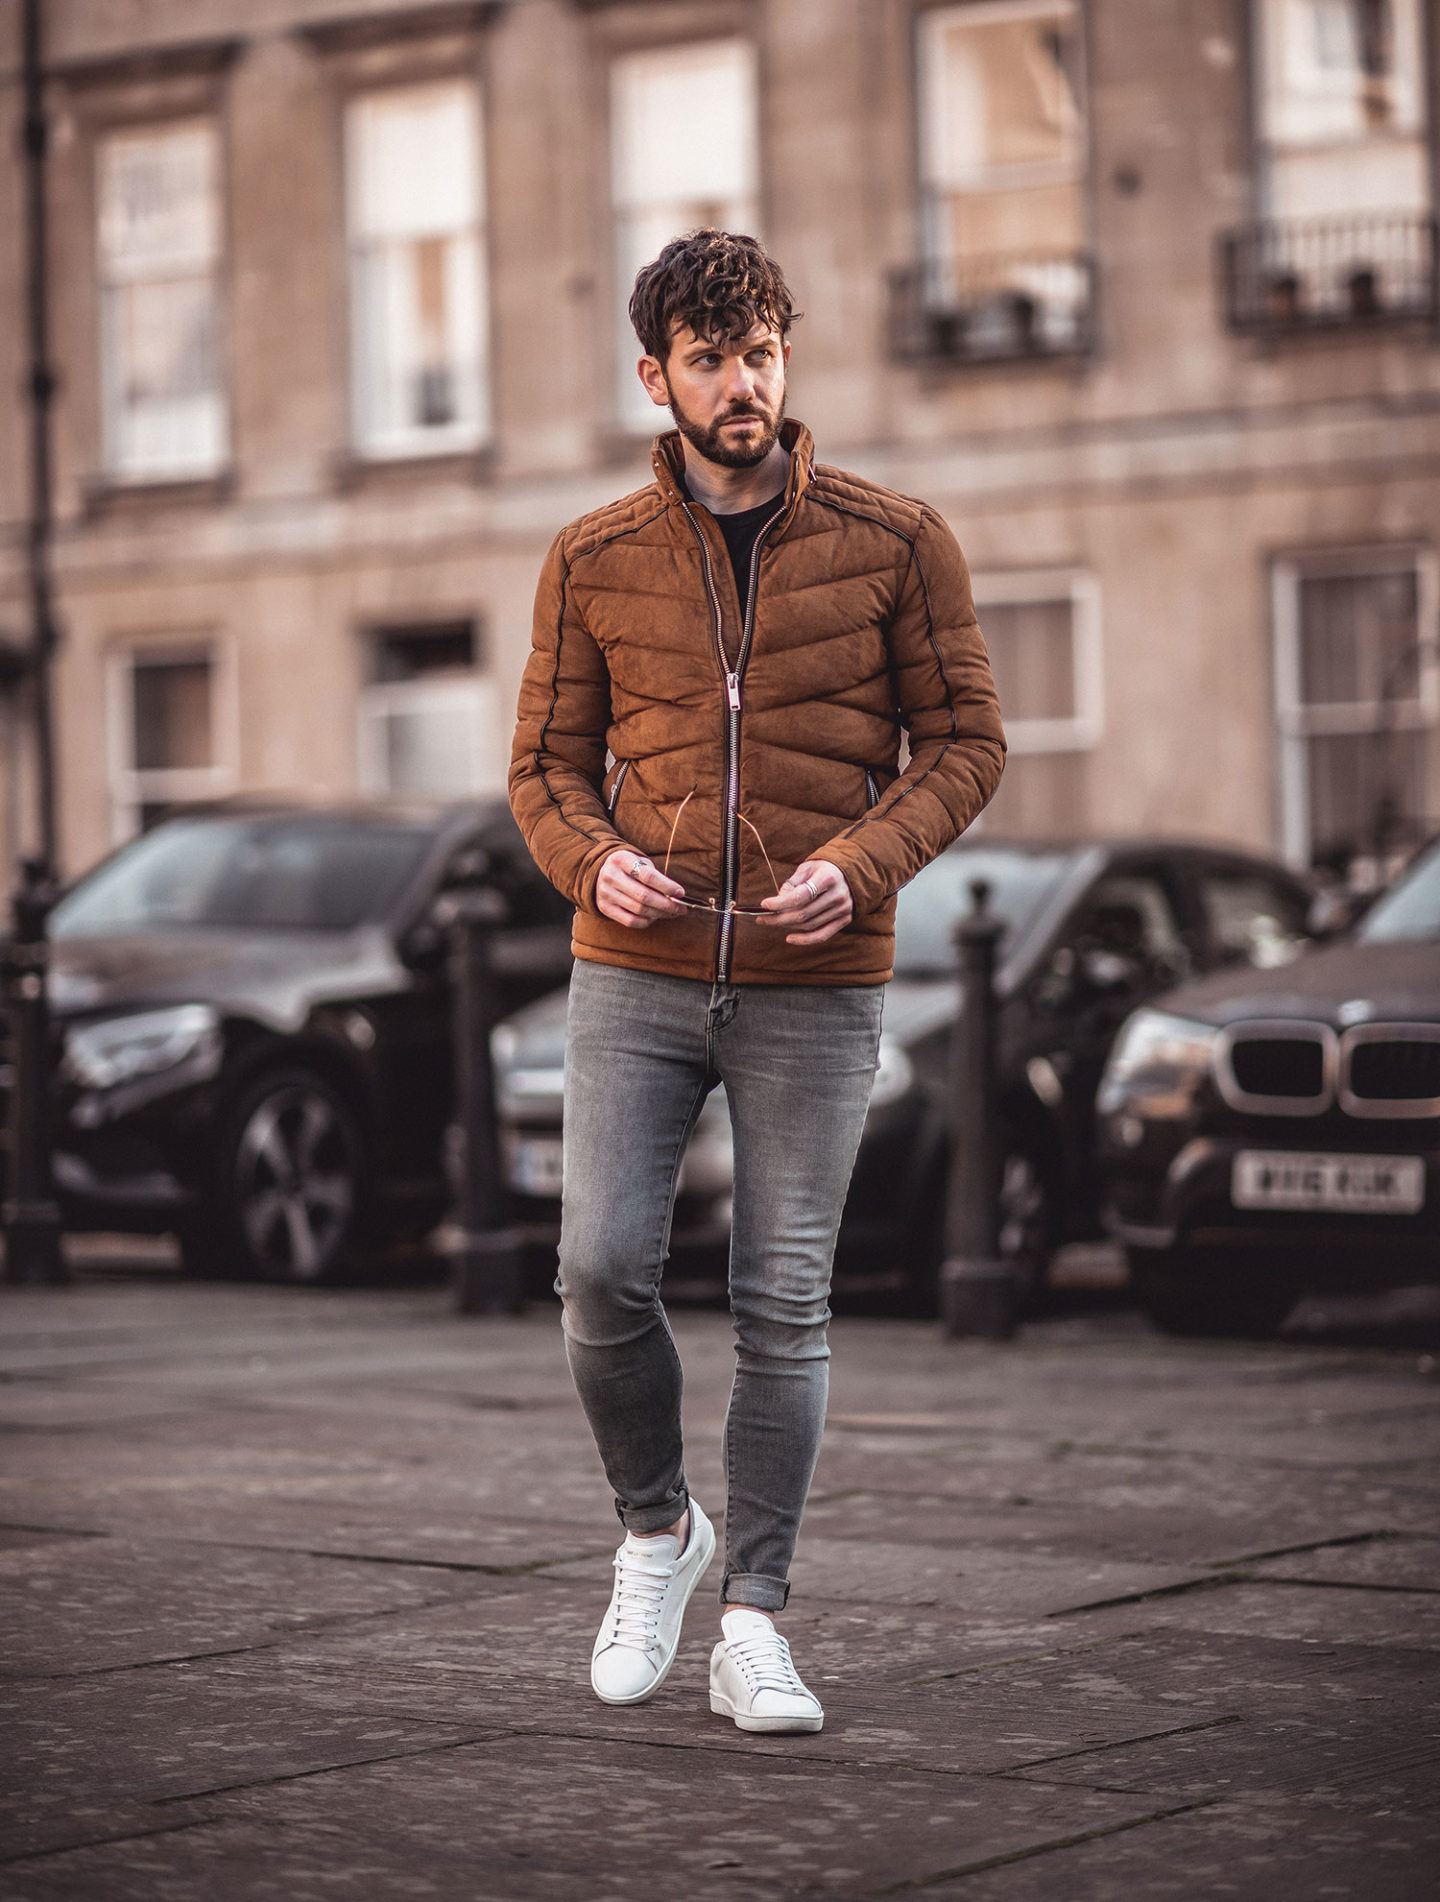 Brown Quilted Jacket Street Style Outfit - Your Average Guy